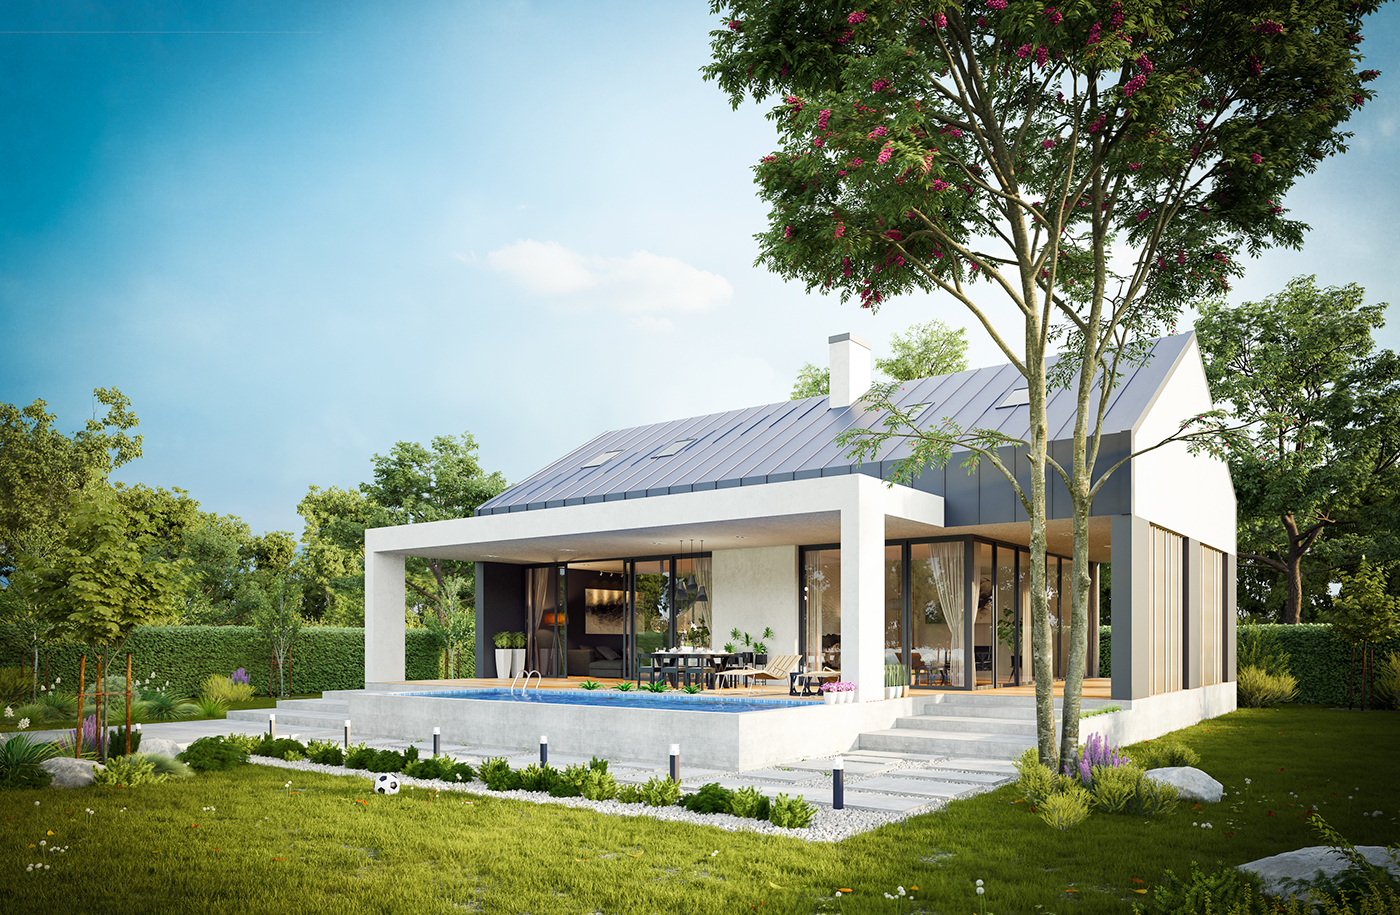 revit 3dmax vray itoo forest